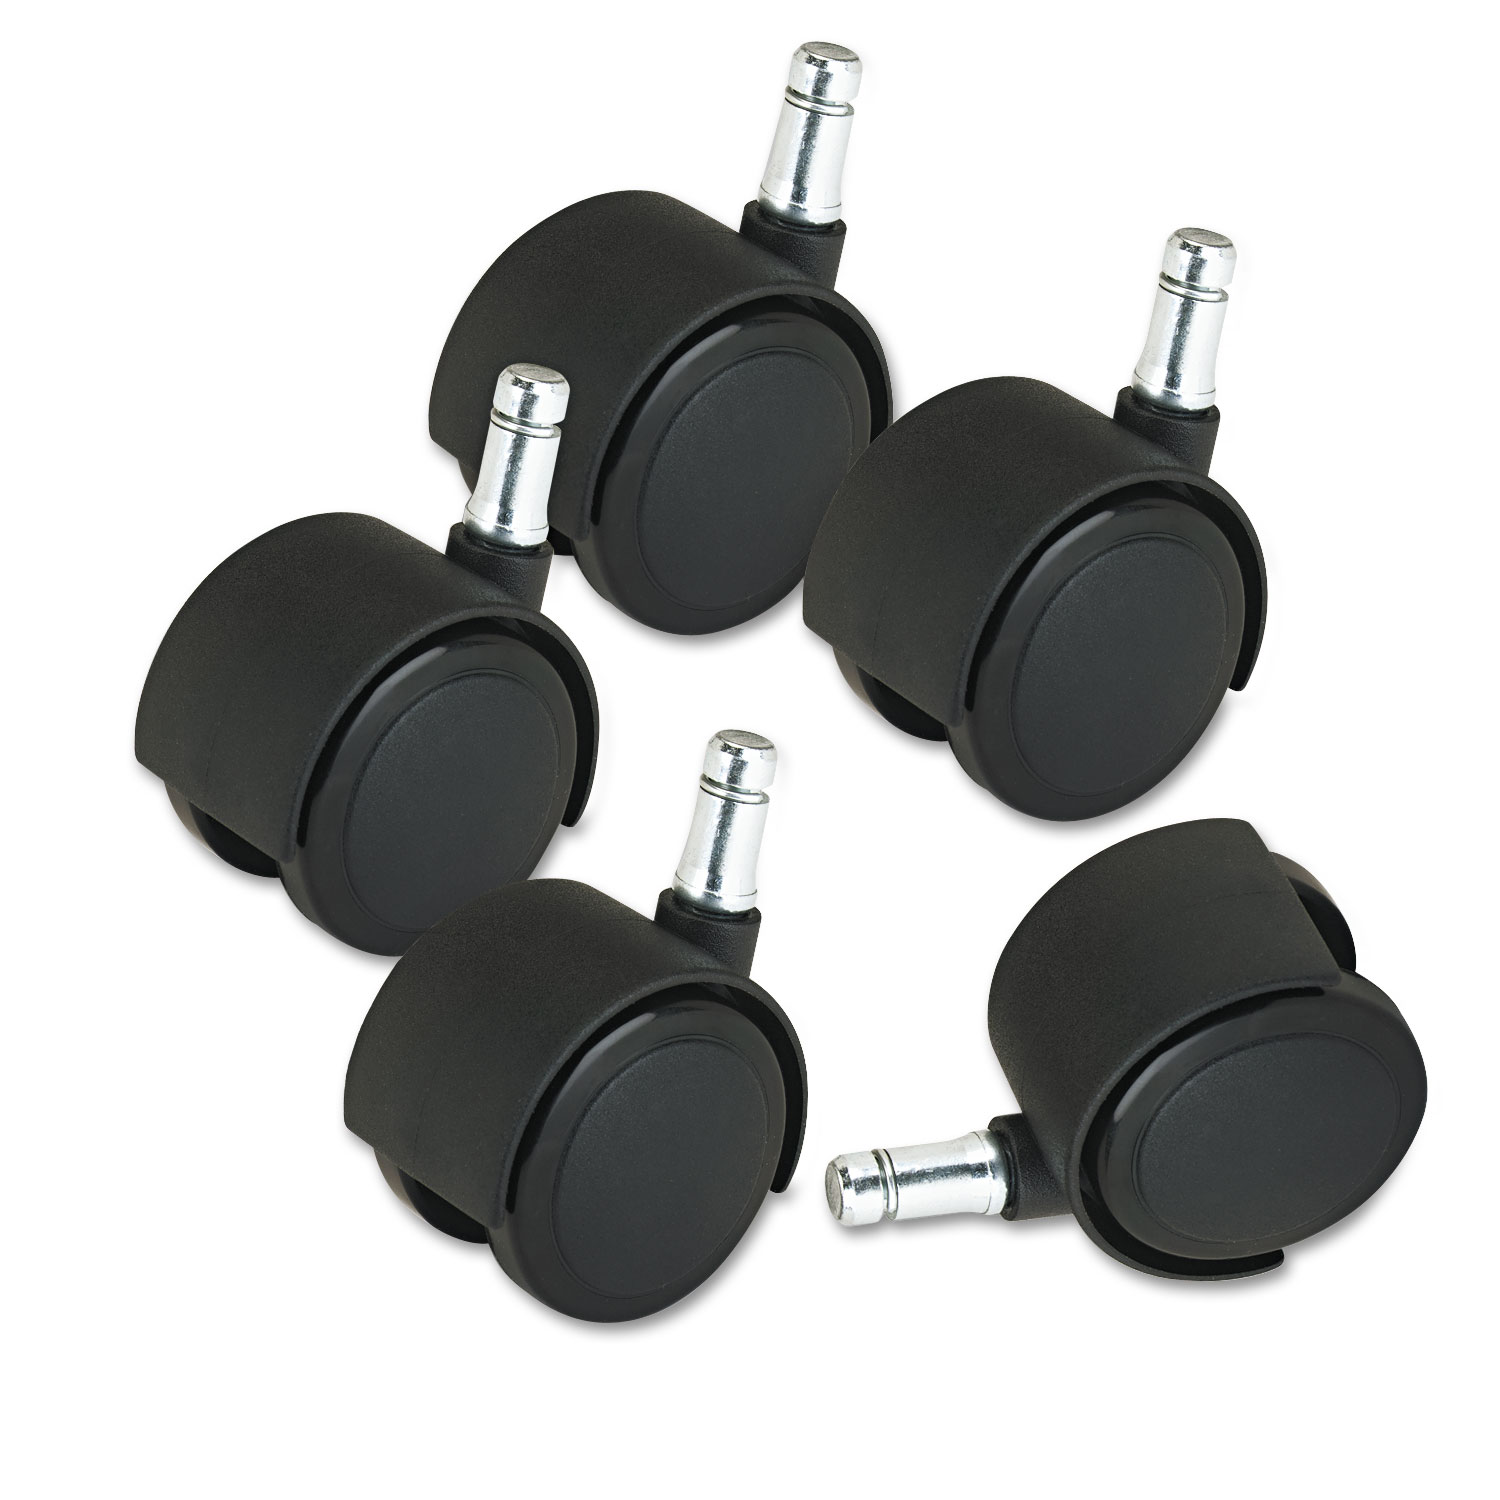  Master Caster 23622 Deluxe Duet Casters, Nylon, B and K Stems, 110 lbs/Caster, 5/Set (MAS23622) 